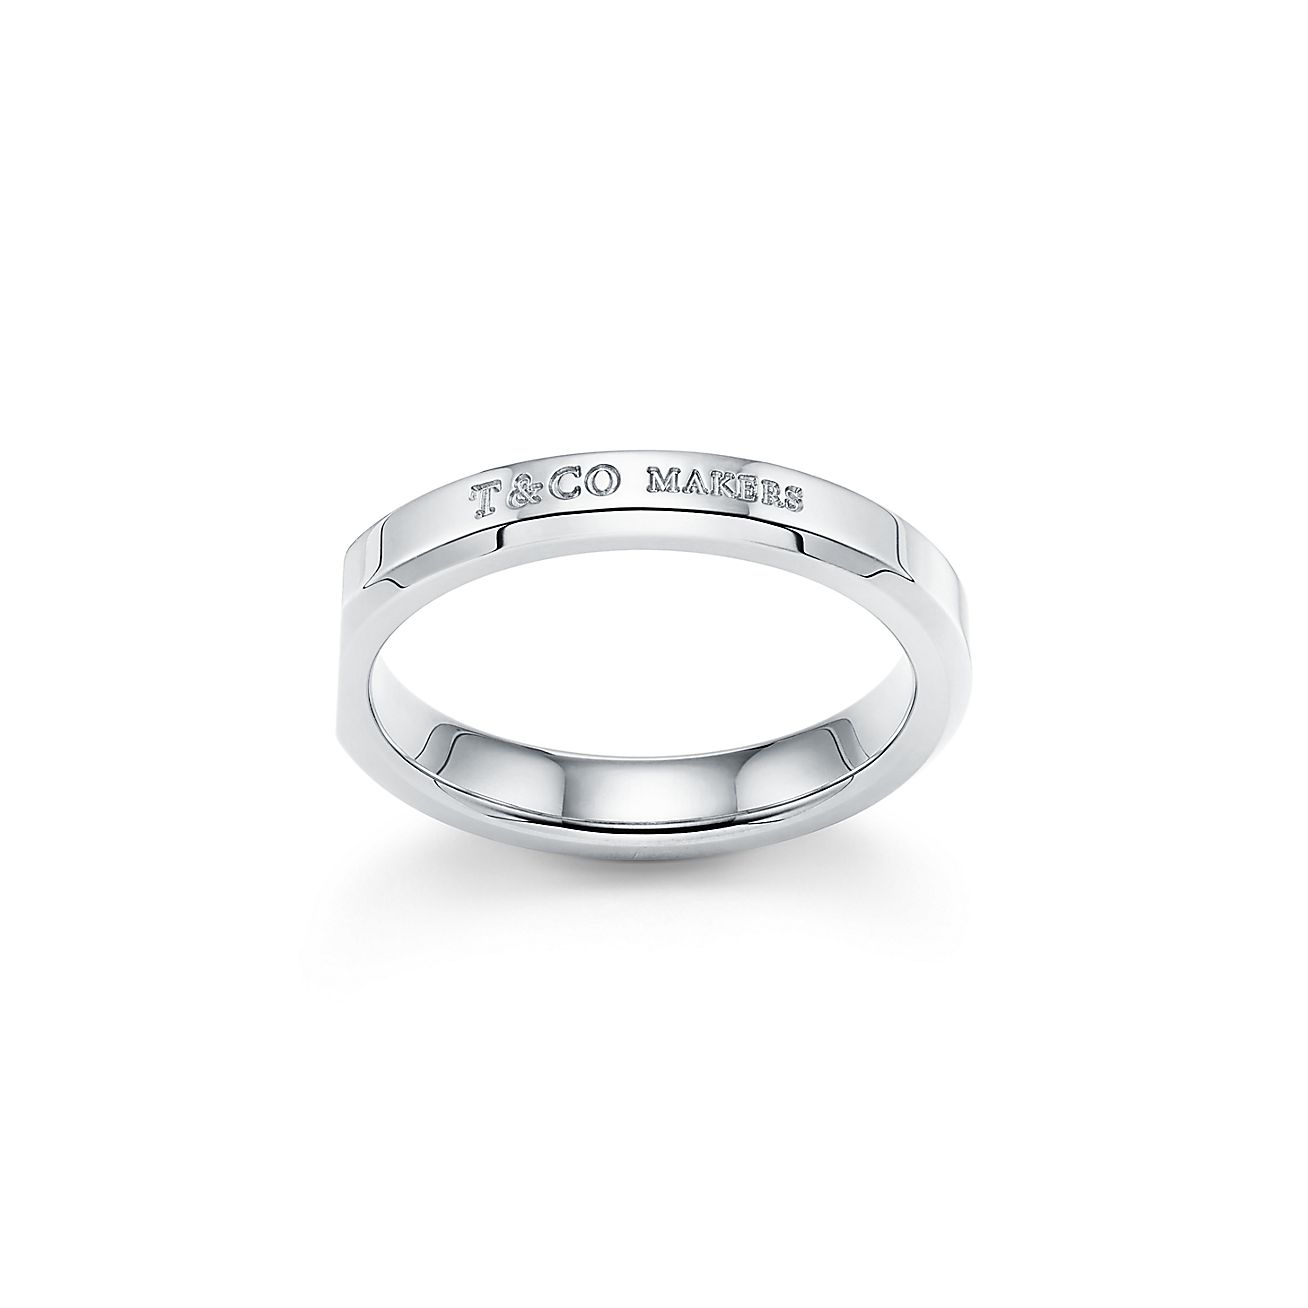 Tiffany 1837® Makers Narrow Slice Ring in Sterling Silver